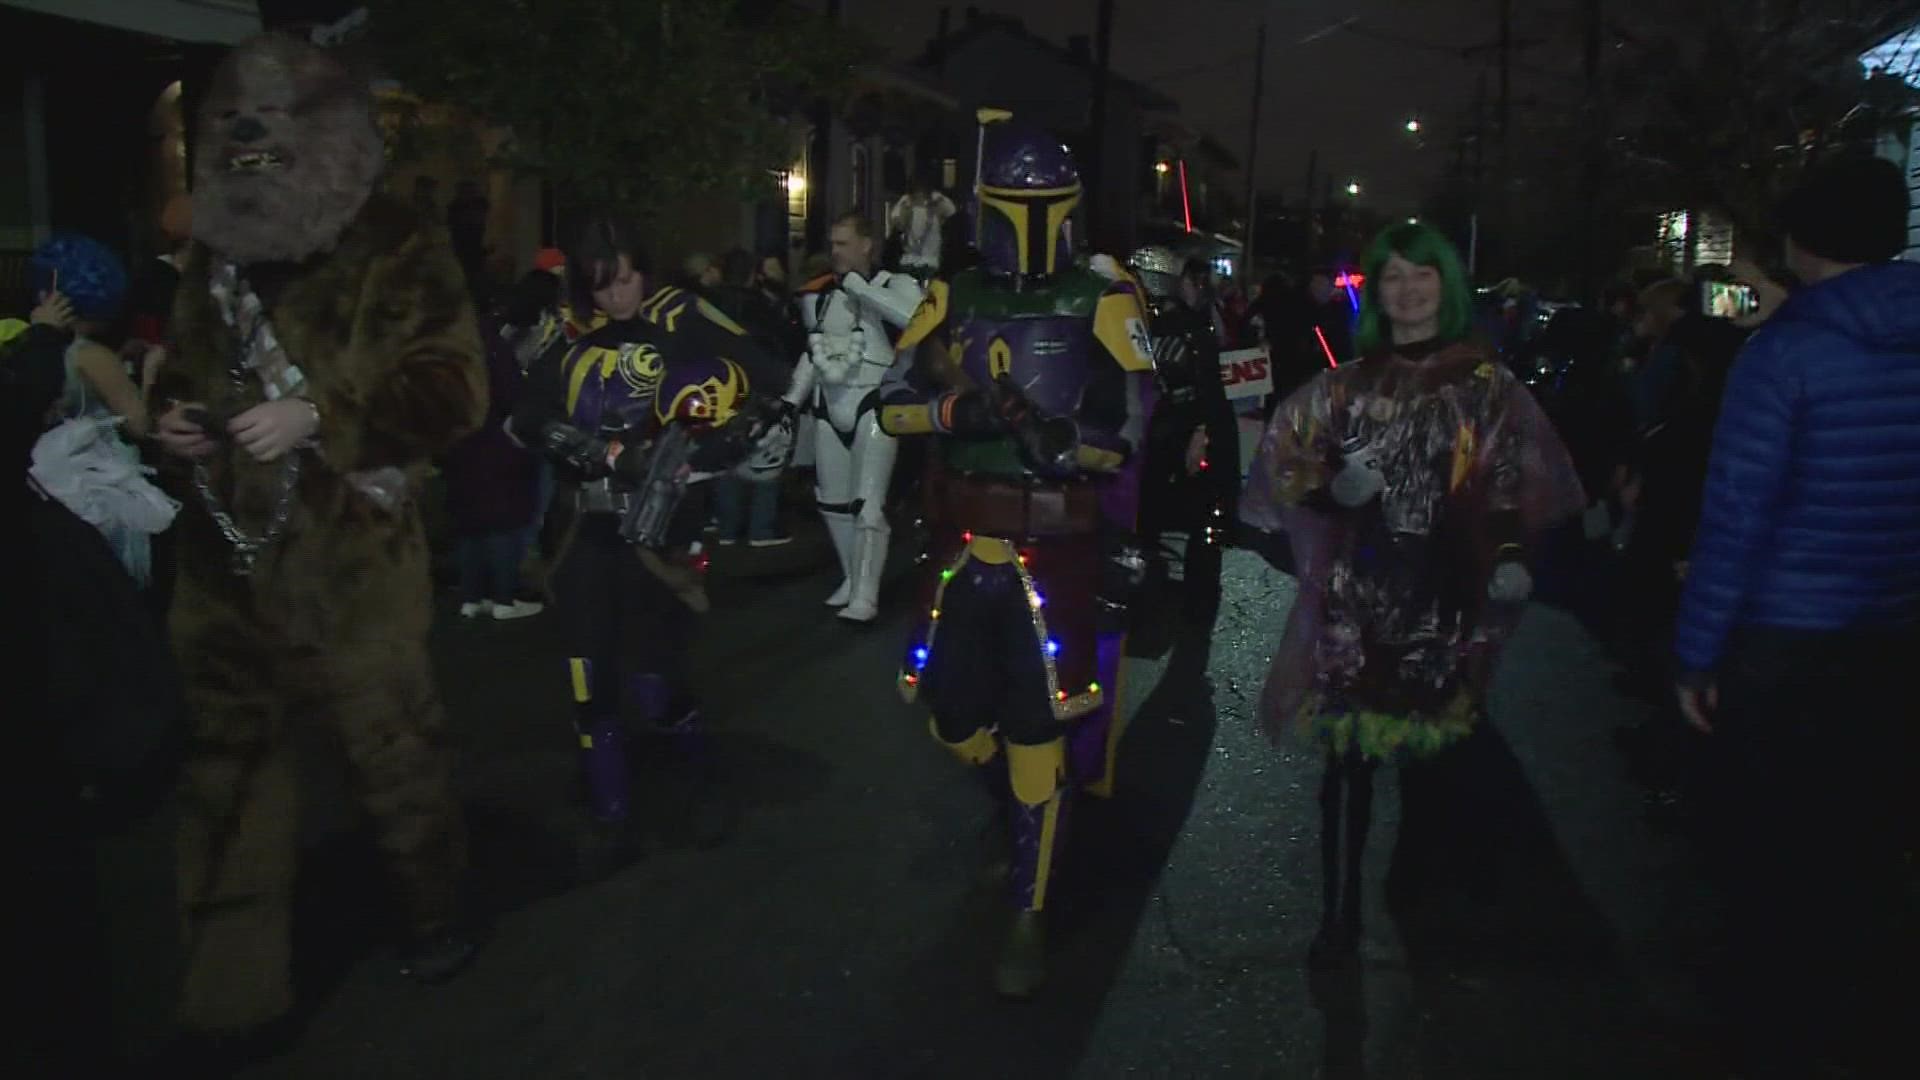 With two days before they roll the krewe of Chewbacchus is being shortened about 12 blocks possibly due to not enough police staff.